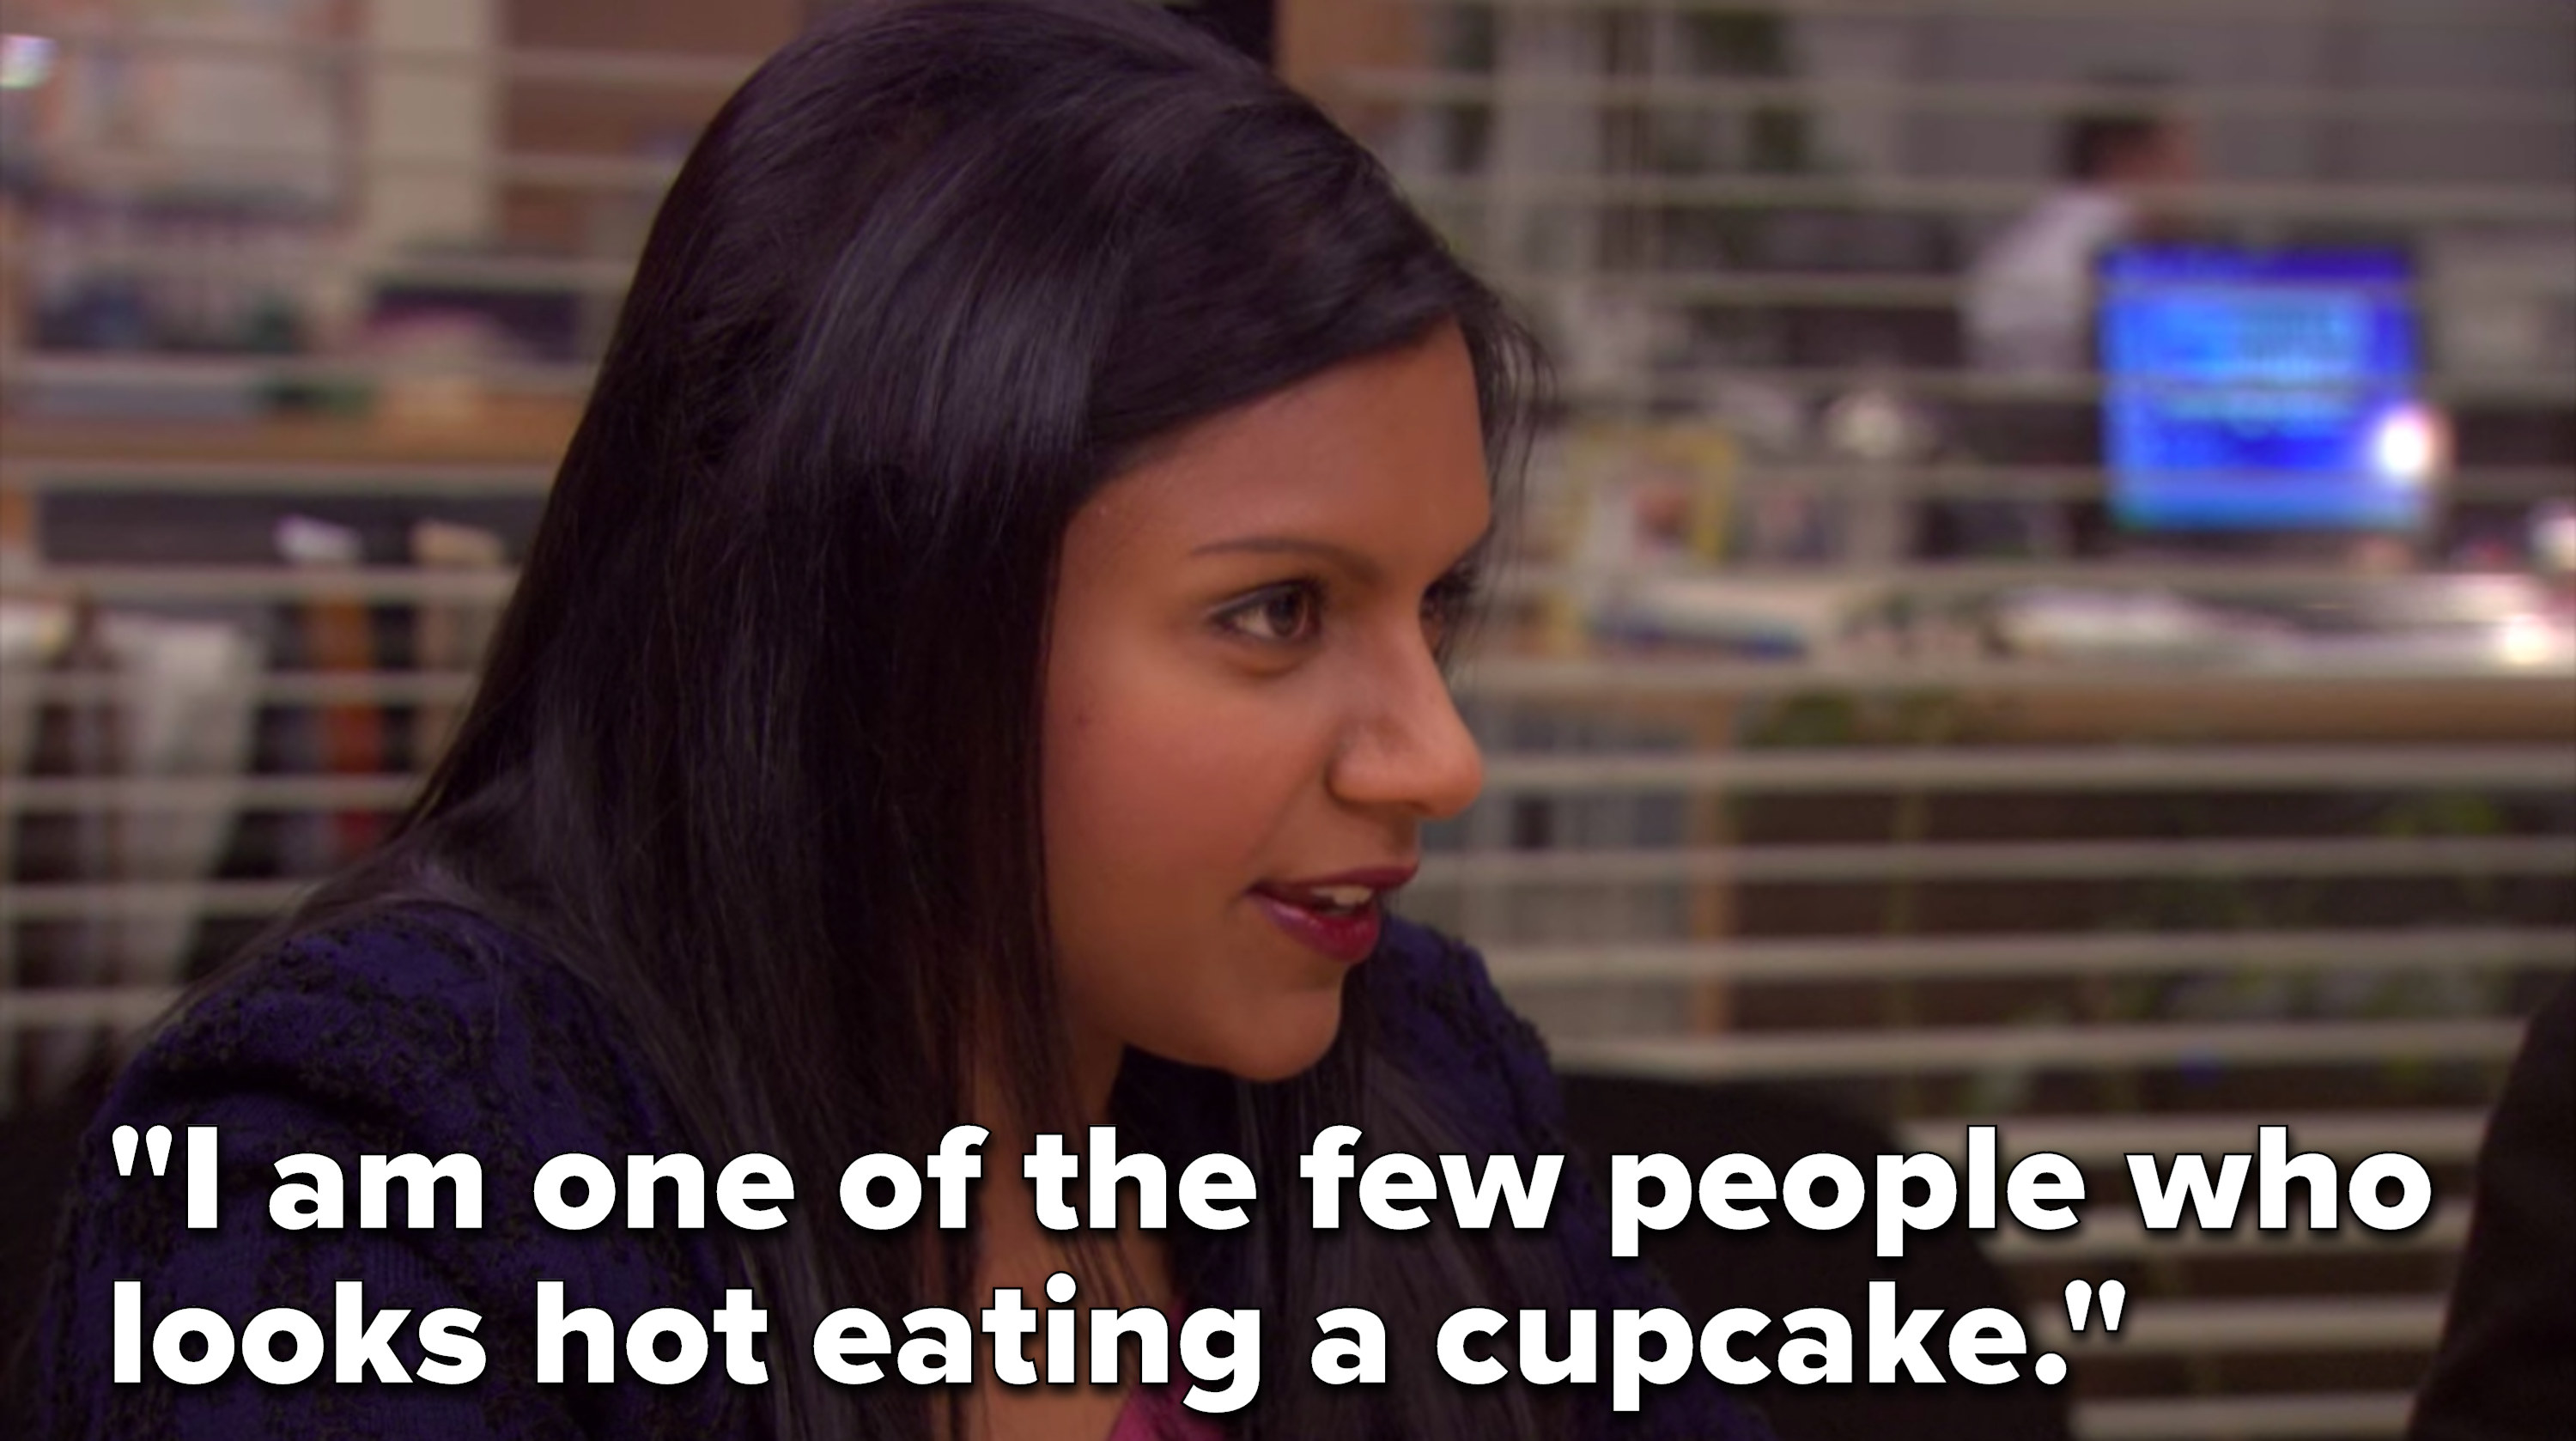 Kelly says, I am one of the few people who looks hot eating a cupcake